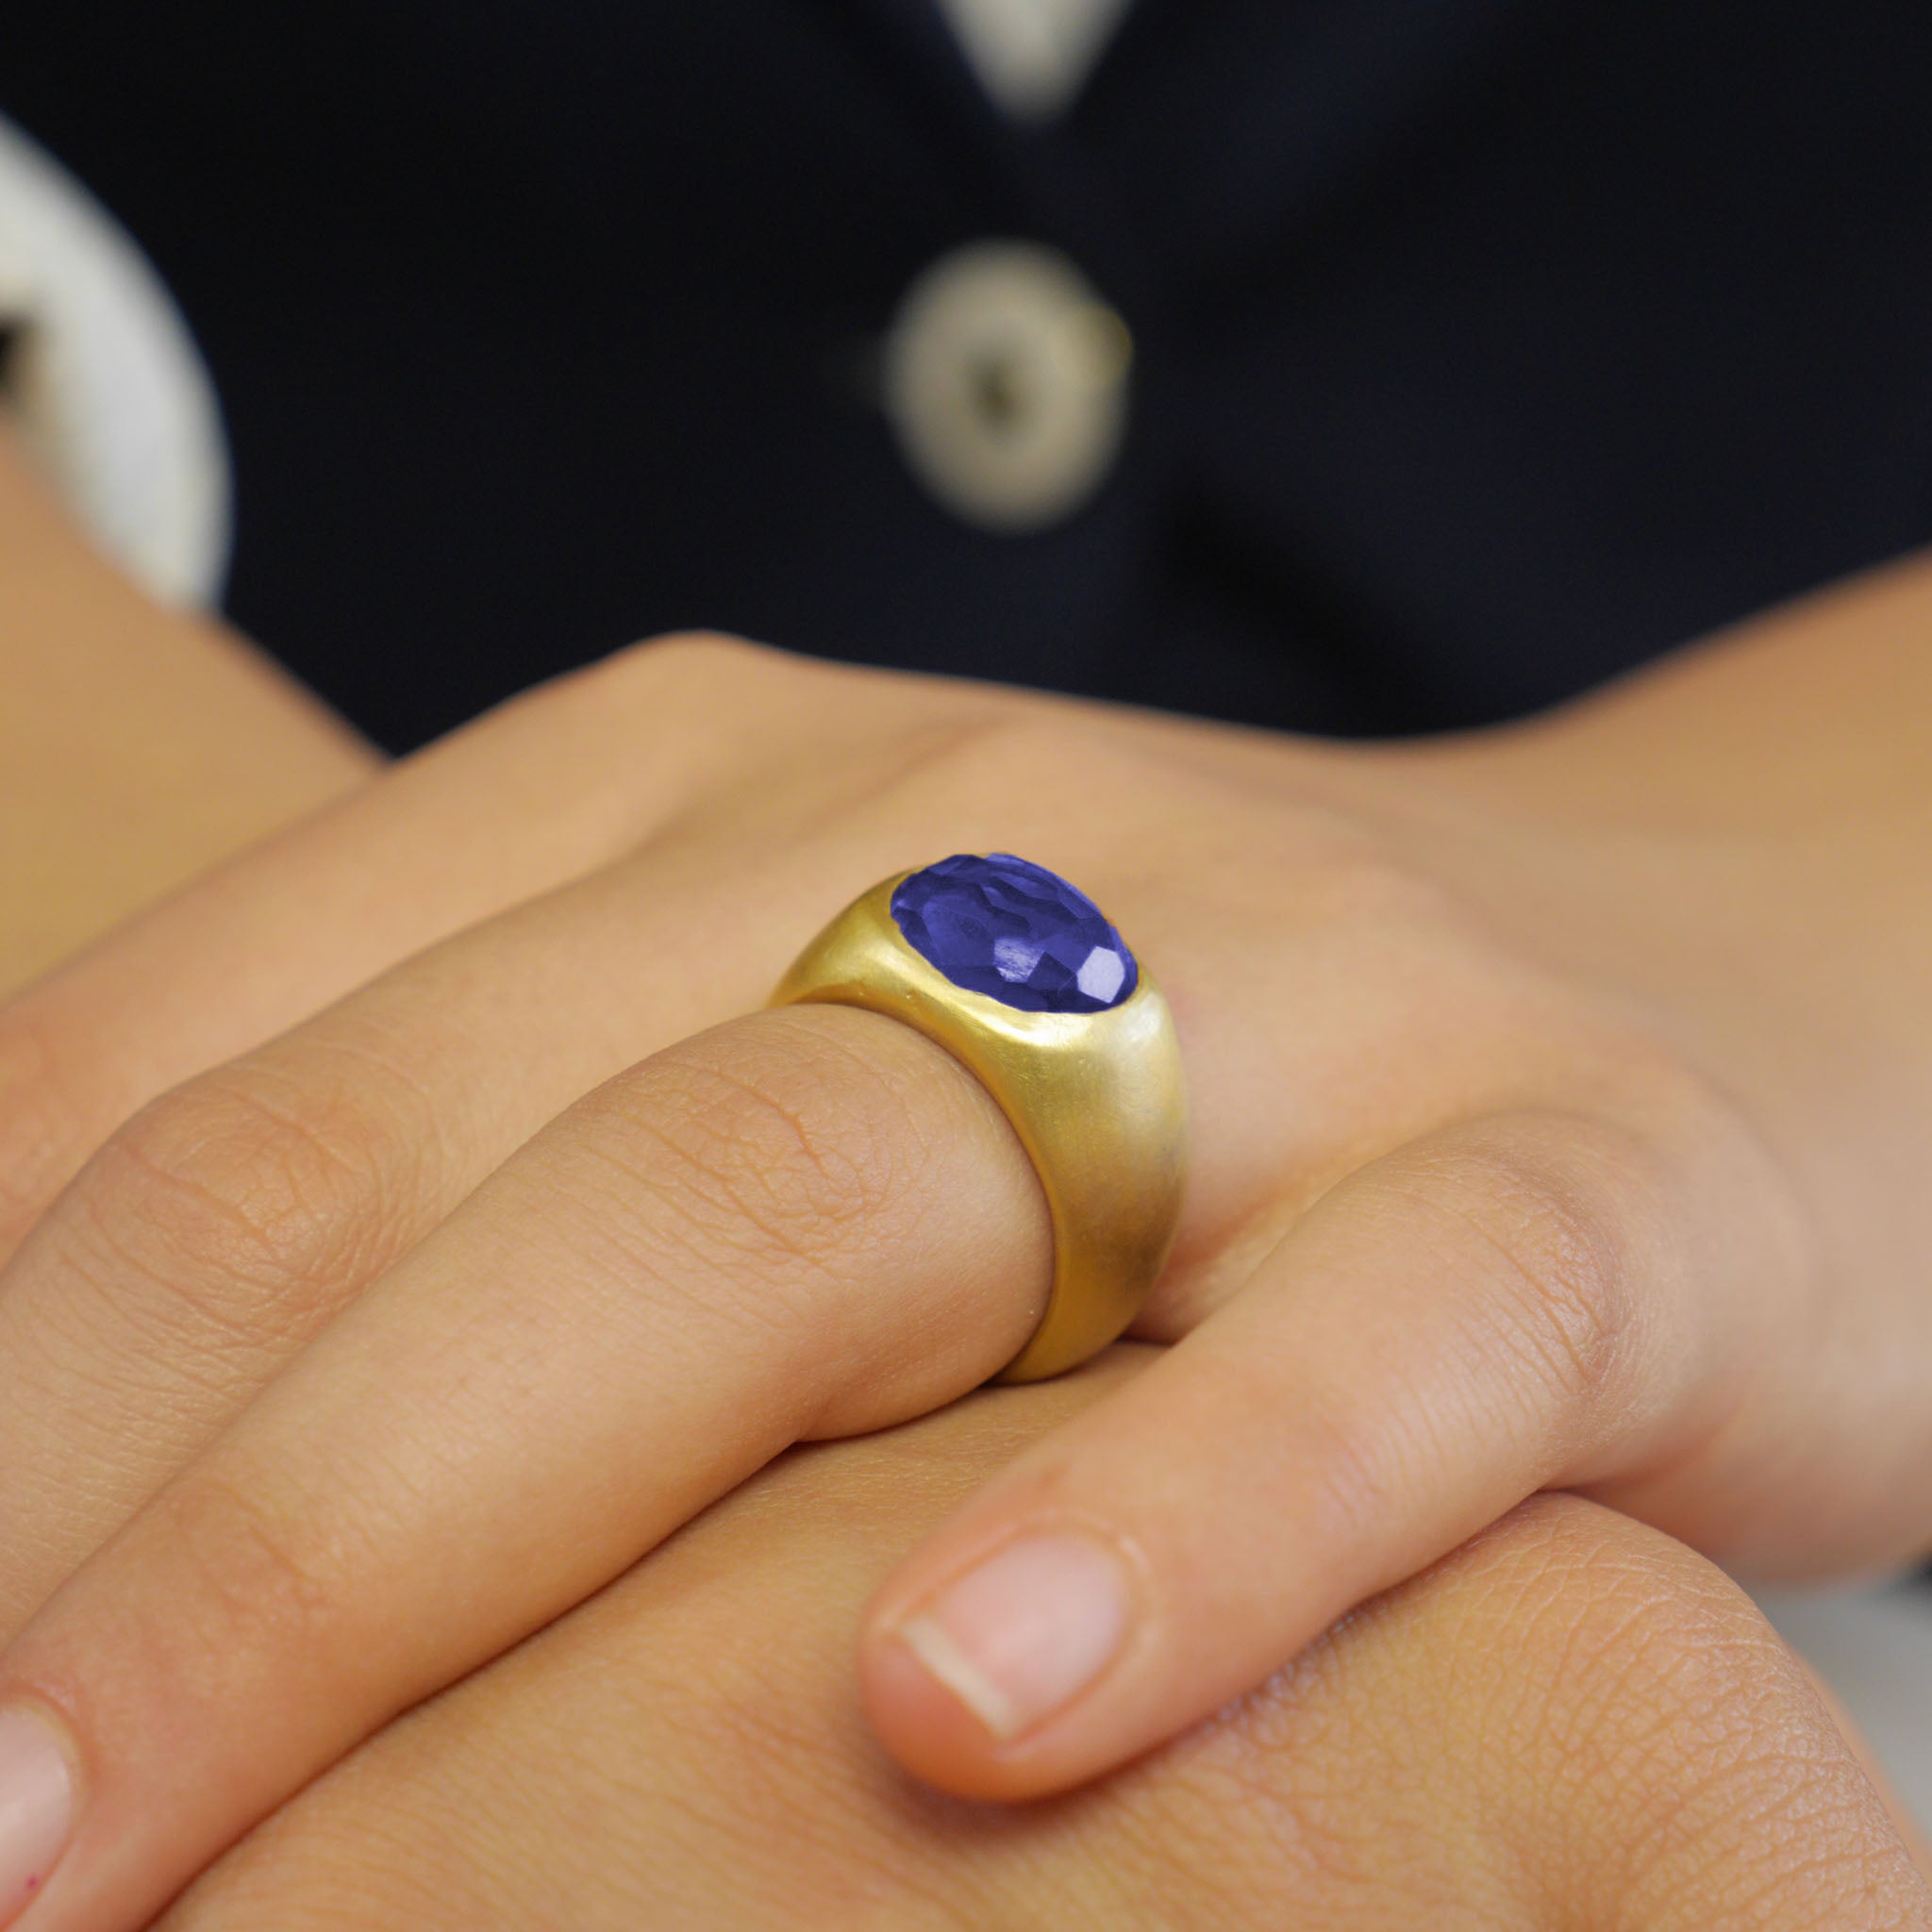 A timeless gold oval ring adorned with a captivating Sapphire gemstone on a model's finger. This classic piece exudes traditional elegance and is beloved for its enduring appeal.